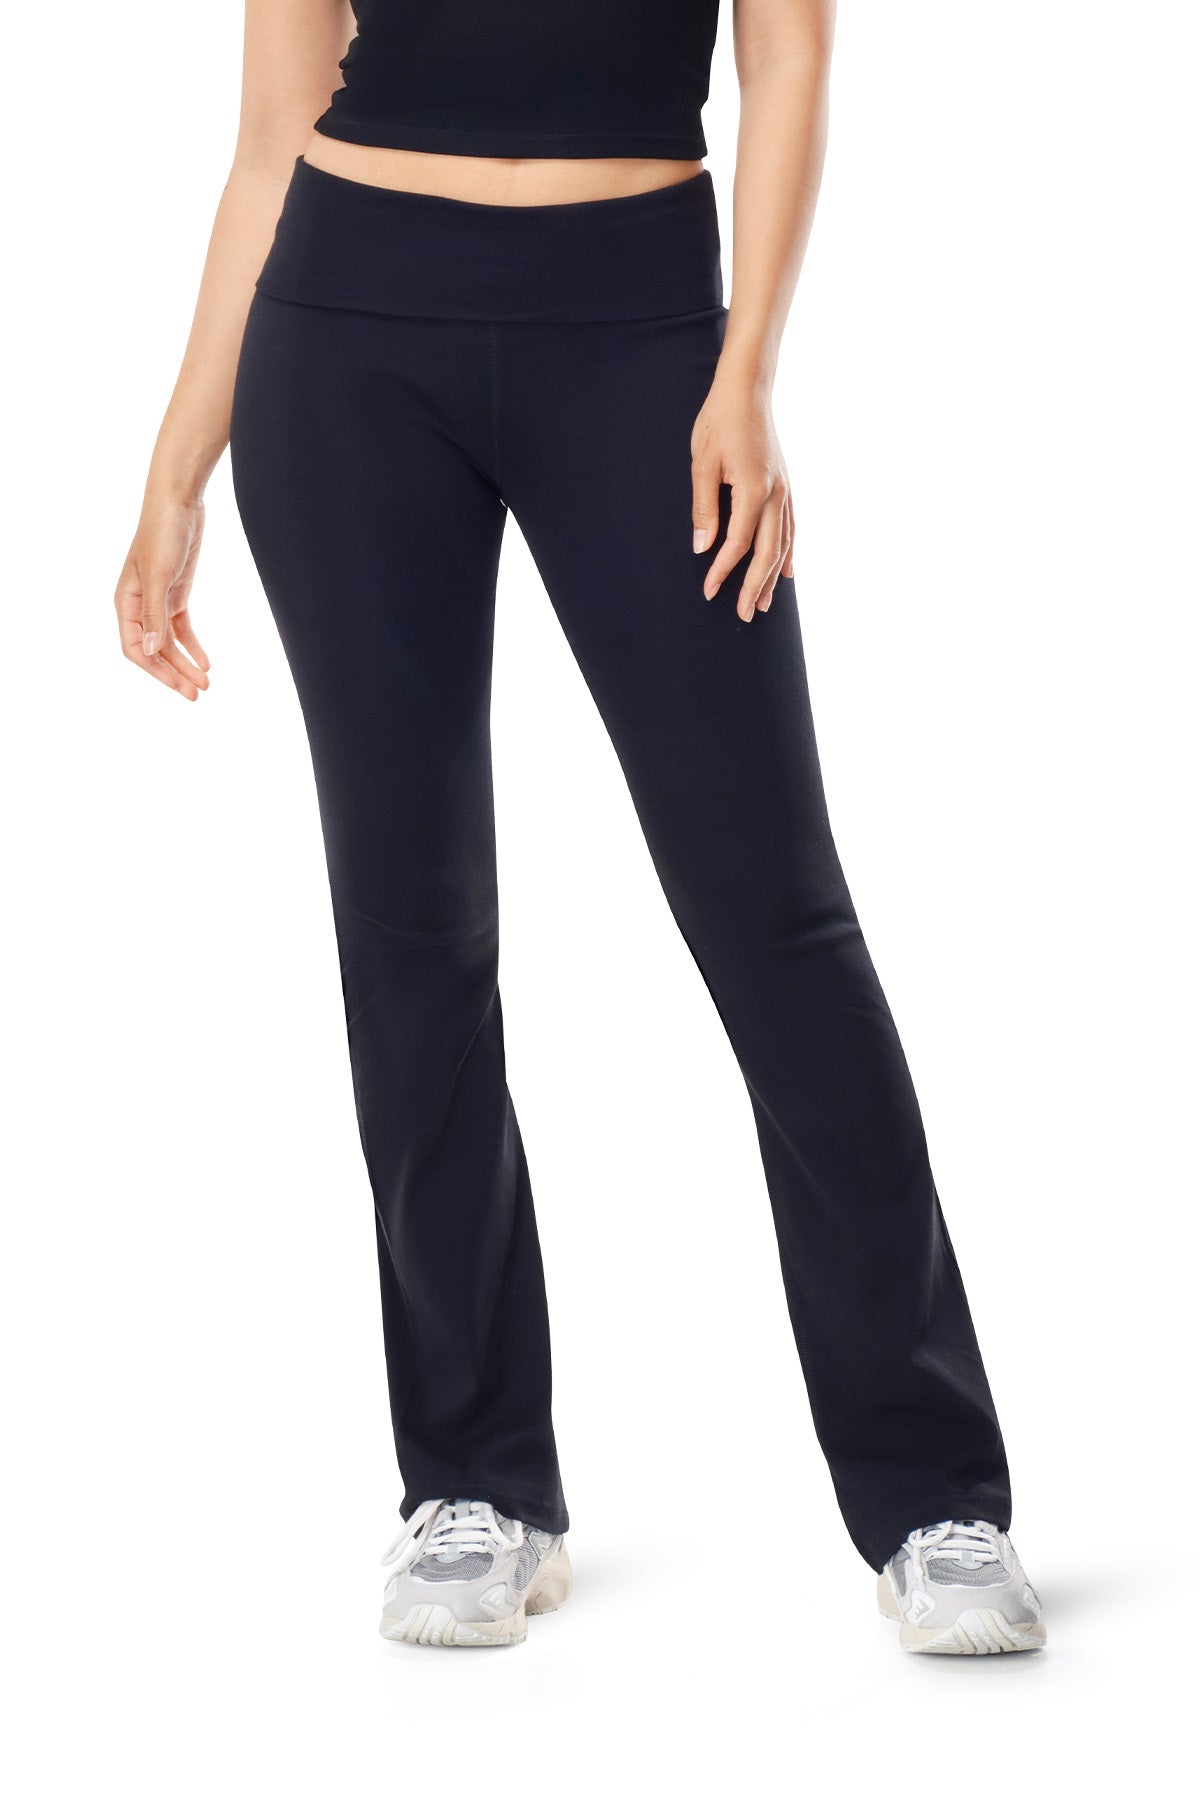 Tiffany - Fitted Flared Pant - Cotton Micro-Rib